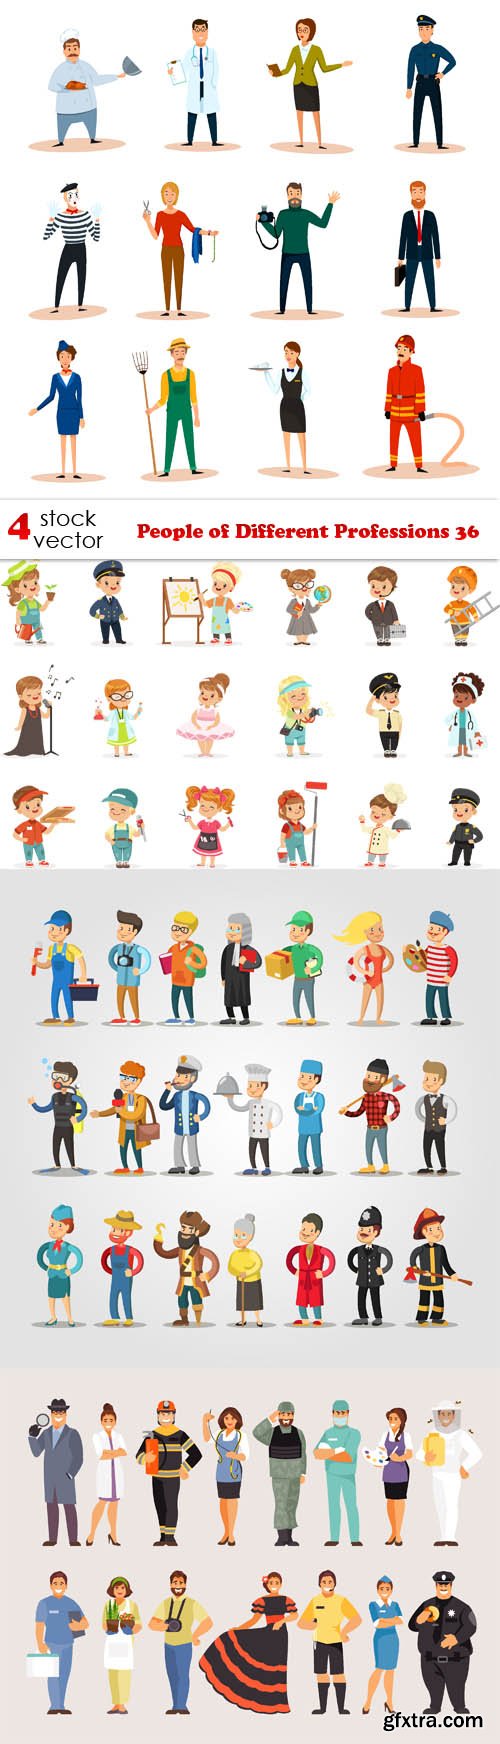 Vectors - People of Different Professions 36